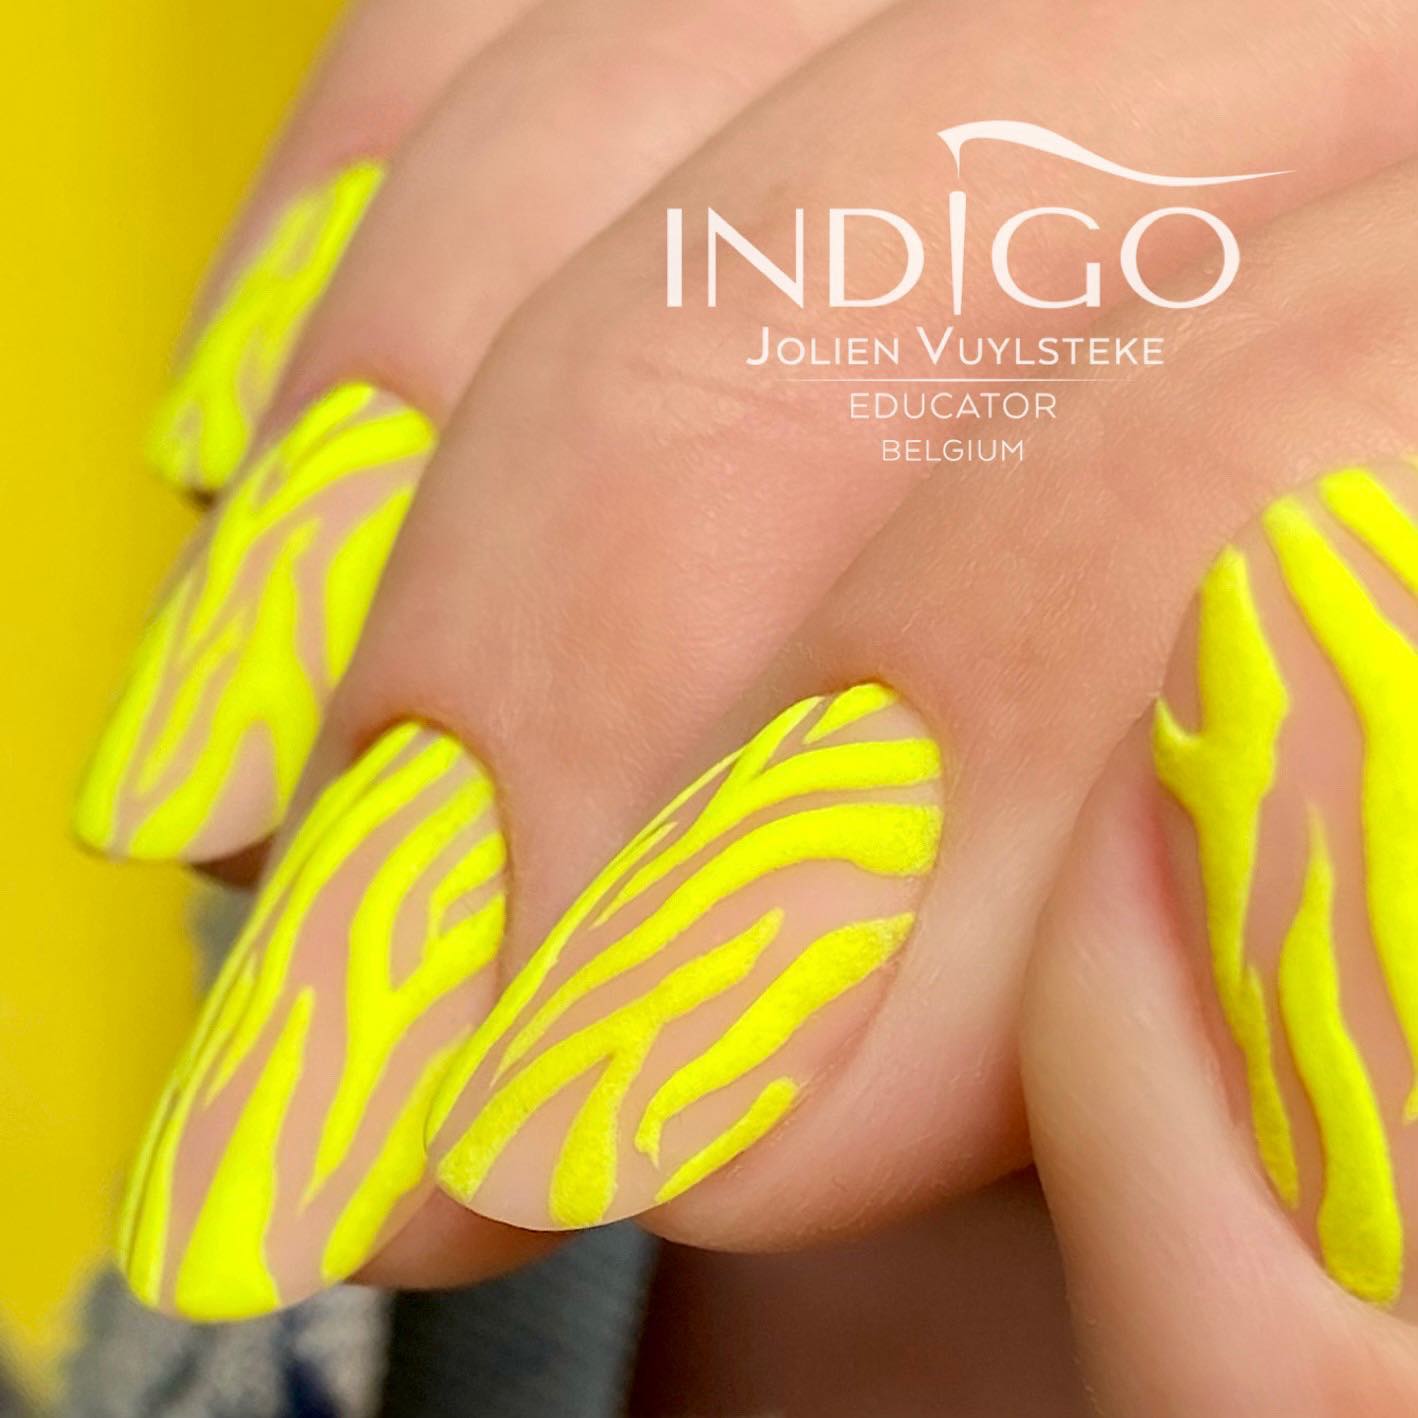 Neon yellow nails are a fun and unexpected way to add color to your oval manicure. They're a great choice for summer, as they'll help you stand out from the crowd when the sun is shining!